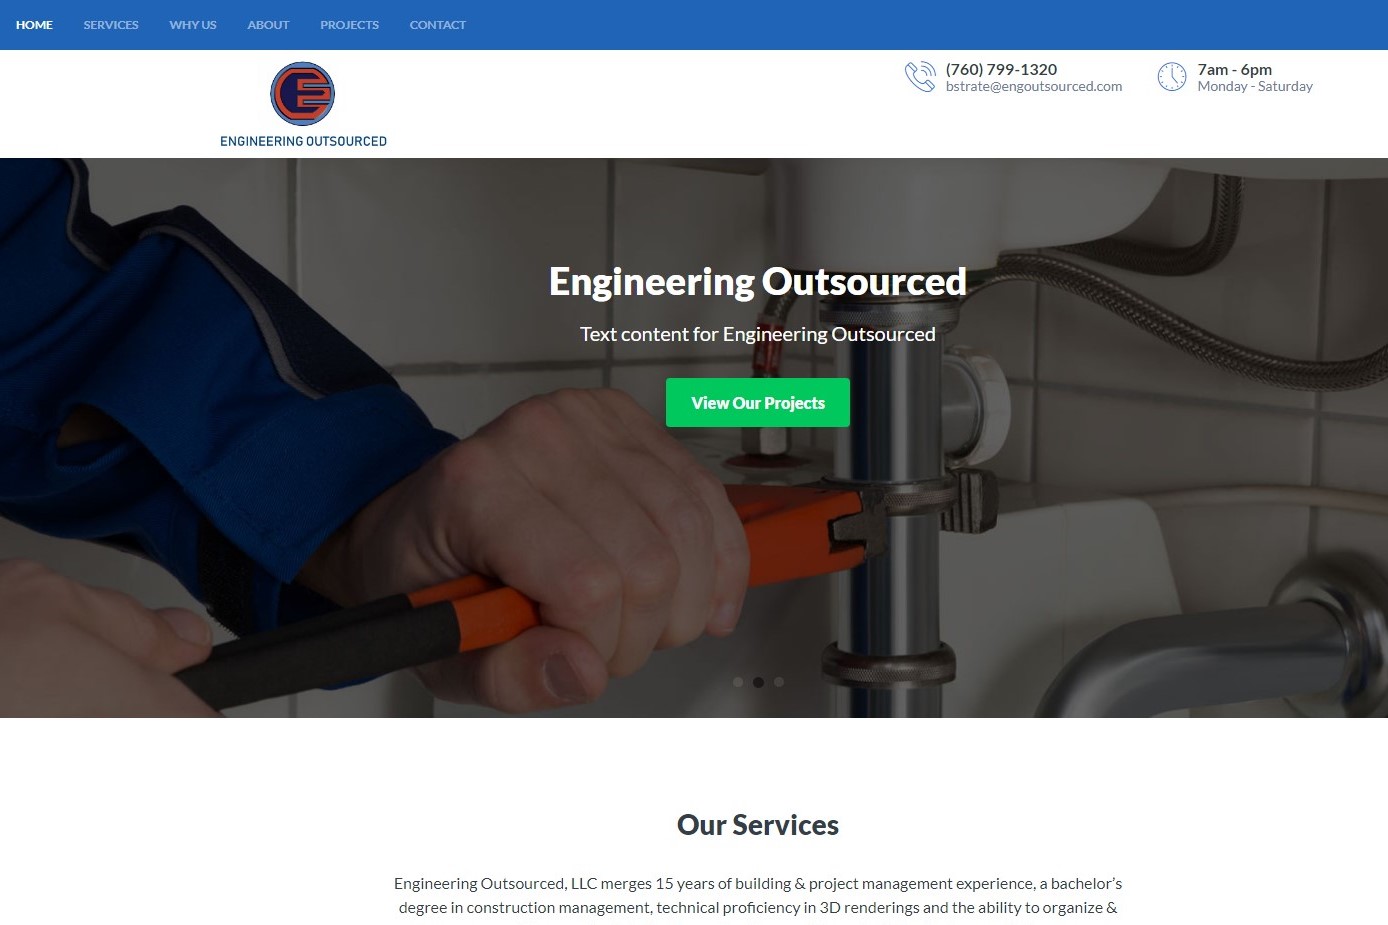 Engineering Outsourced Website